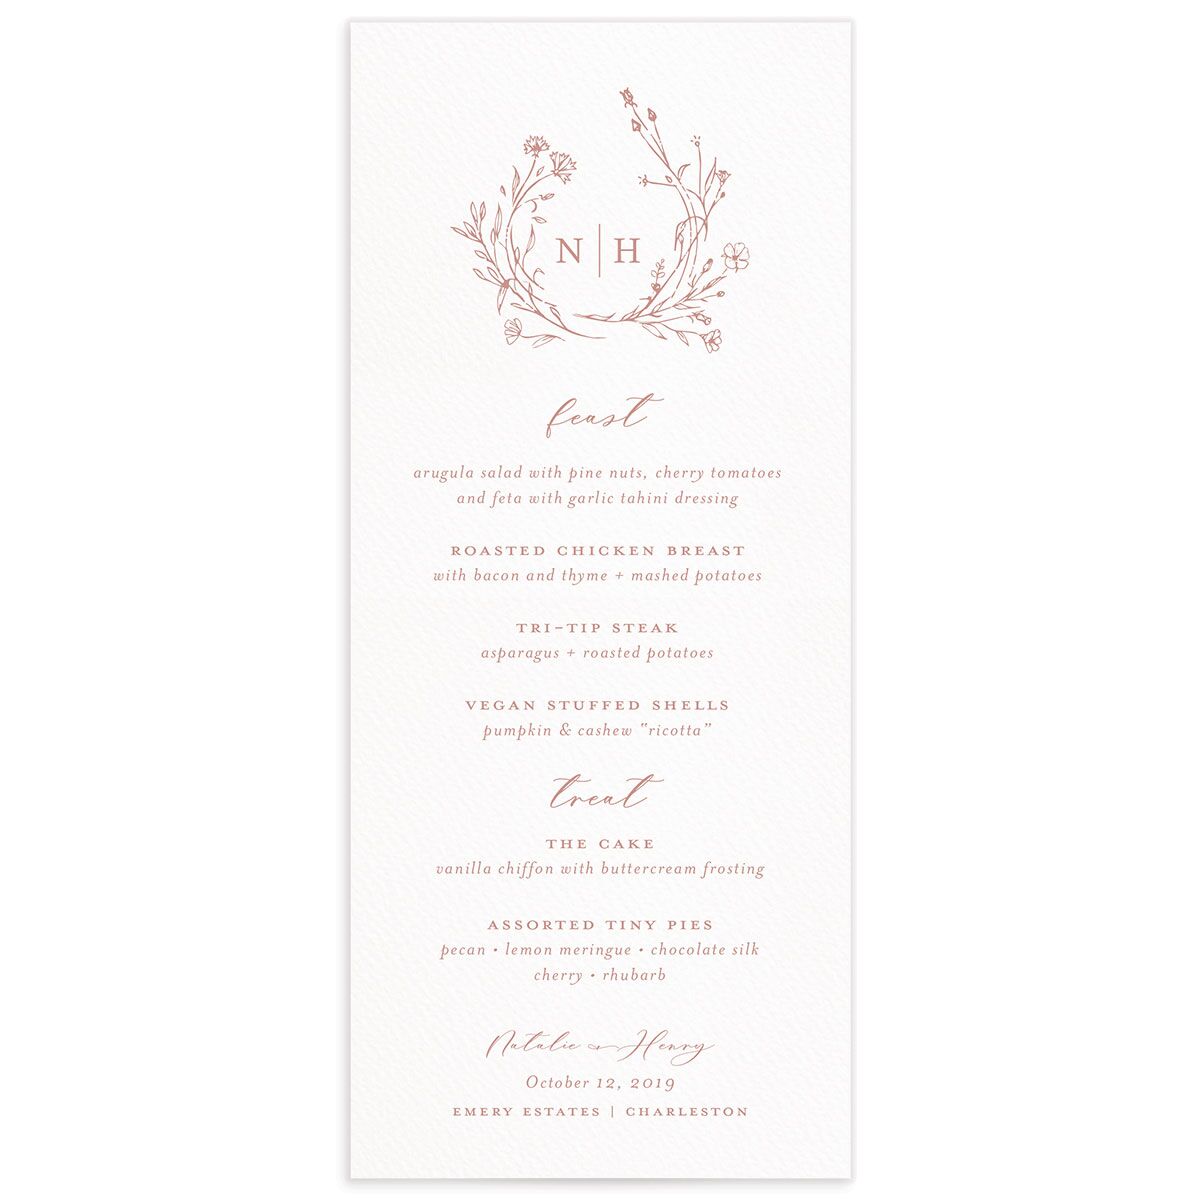 Illustrated Floral Menus [object Object] in Pink